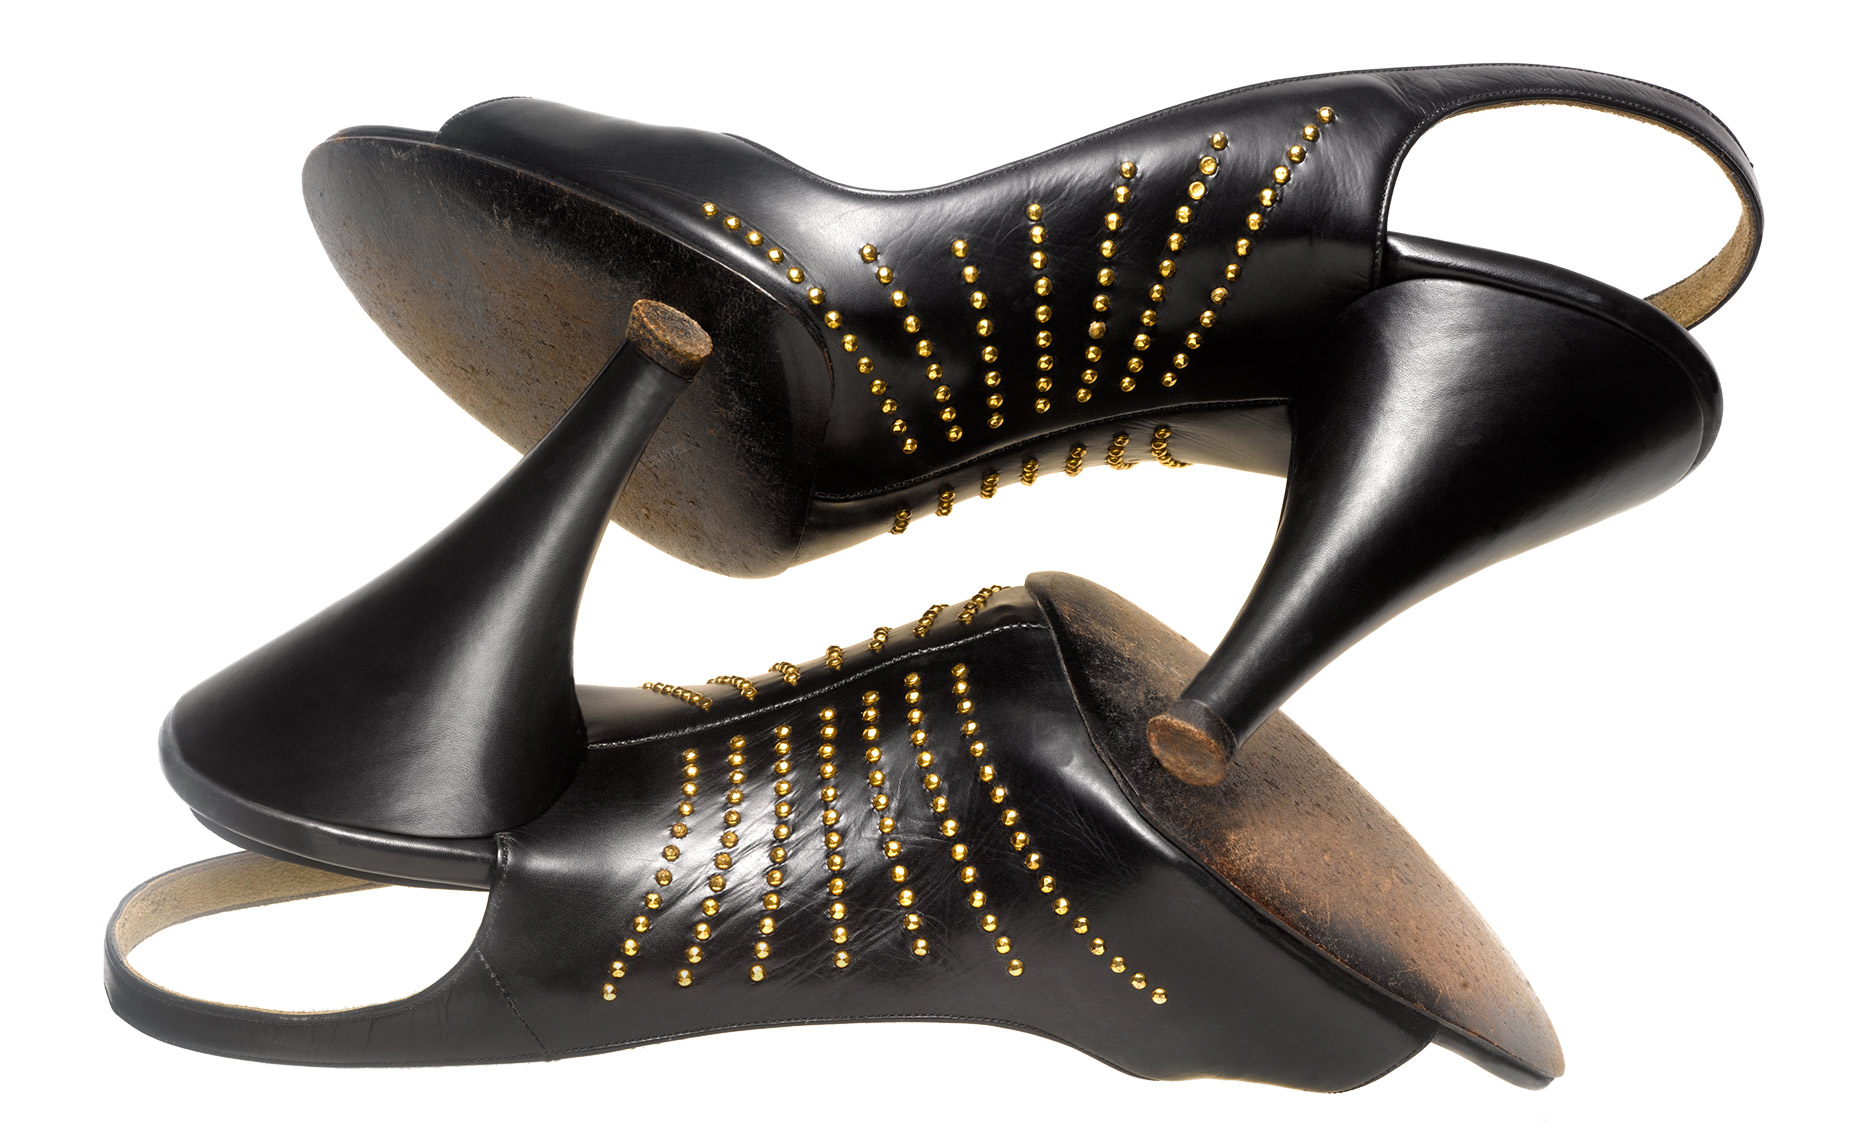 "Under Construction" covered and studded shank shoe by Beth Levine